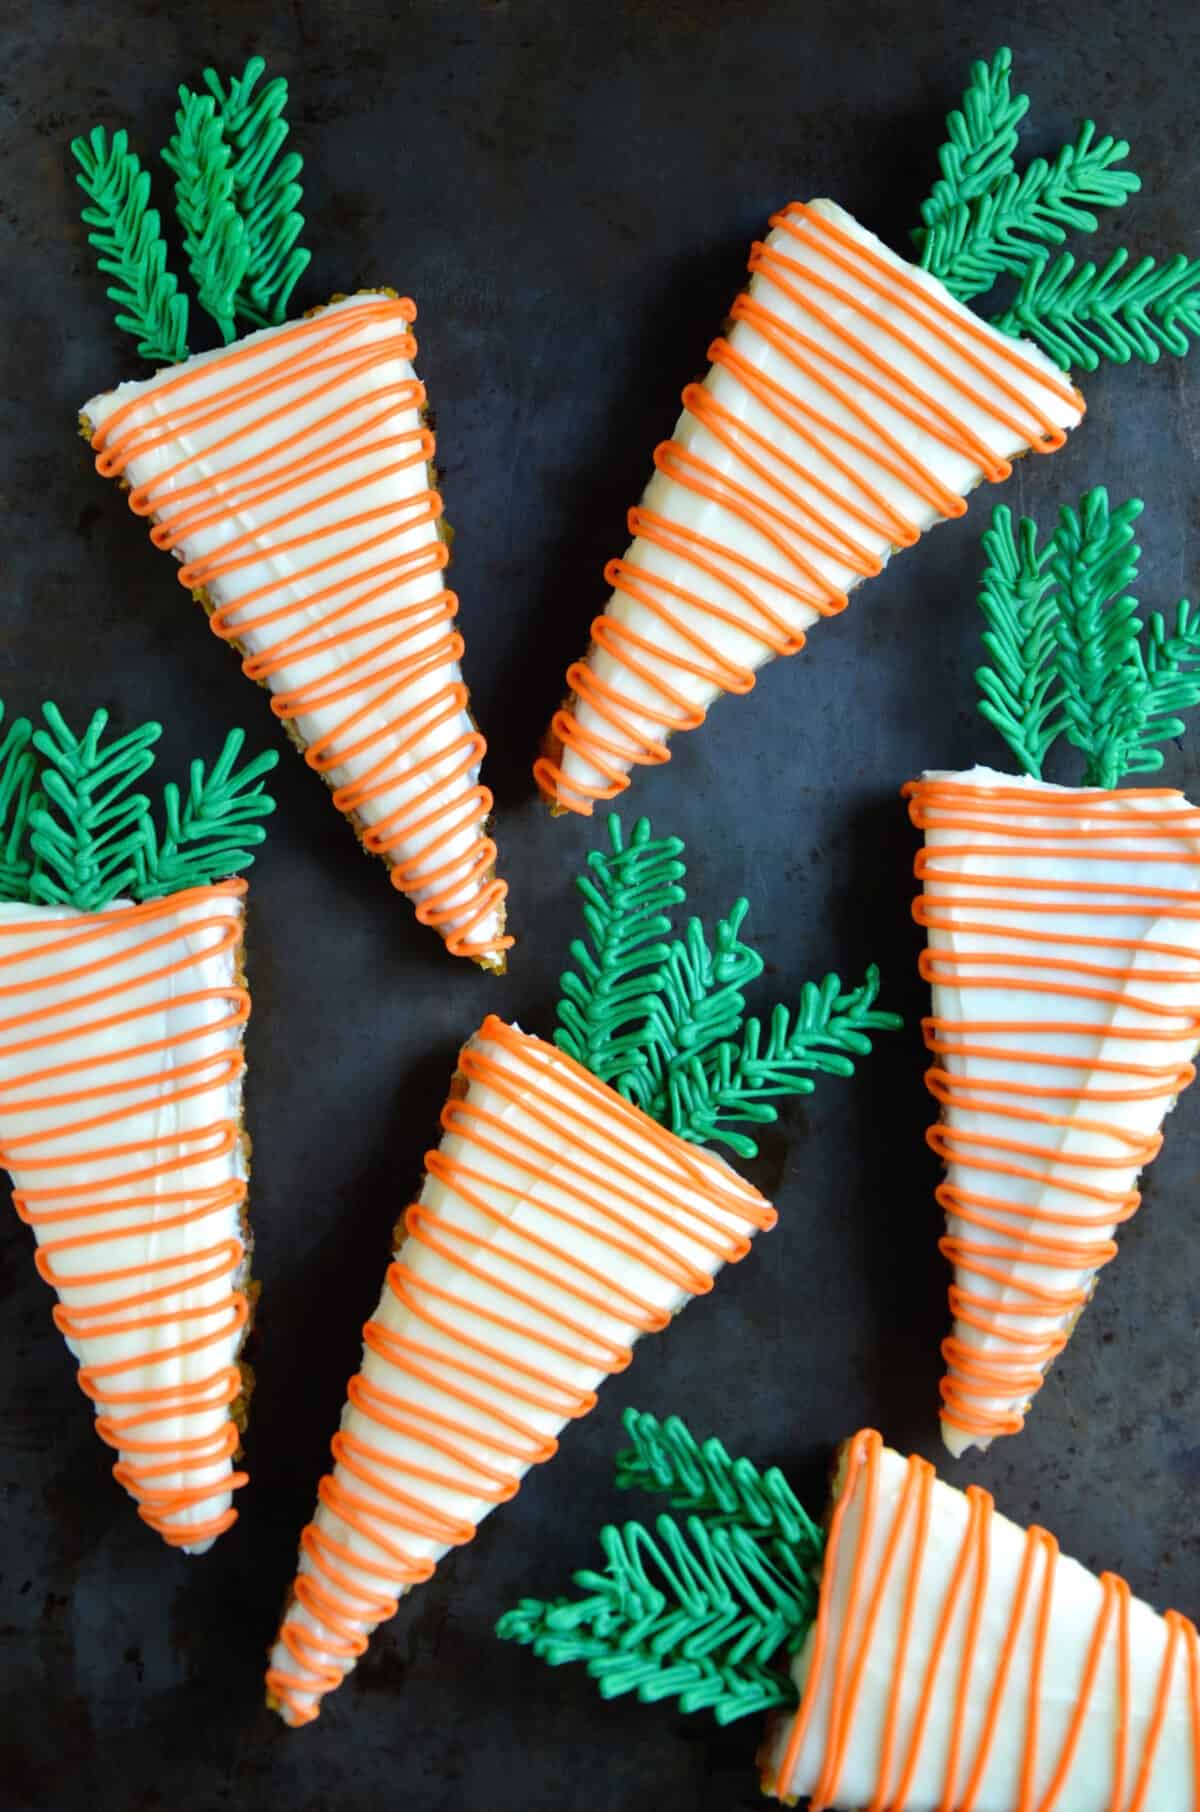 Pineapple carrot cake with cream cheese frosting cut into triangles and drizzled with orange candy melts.